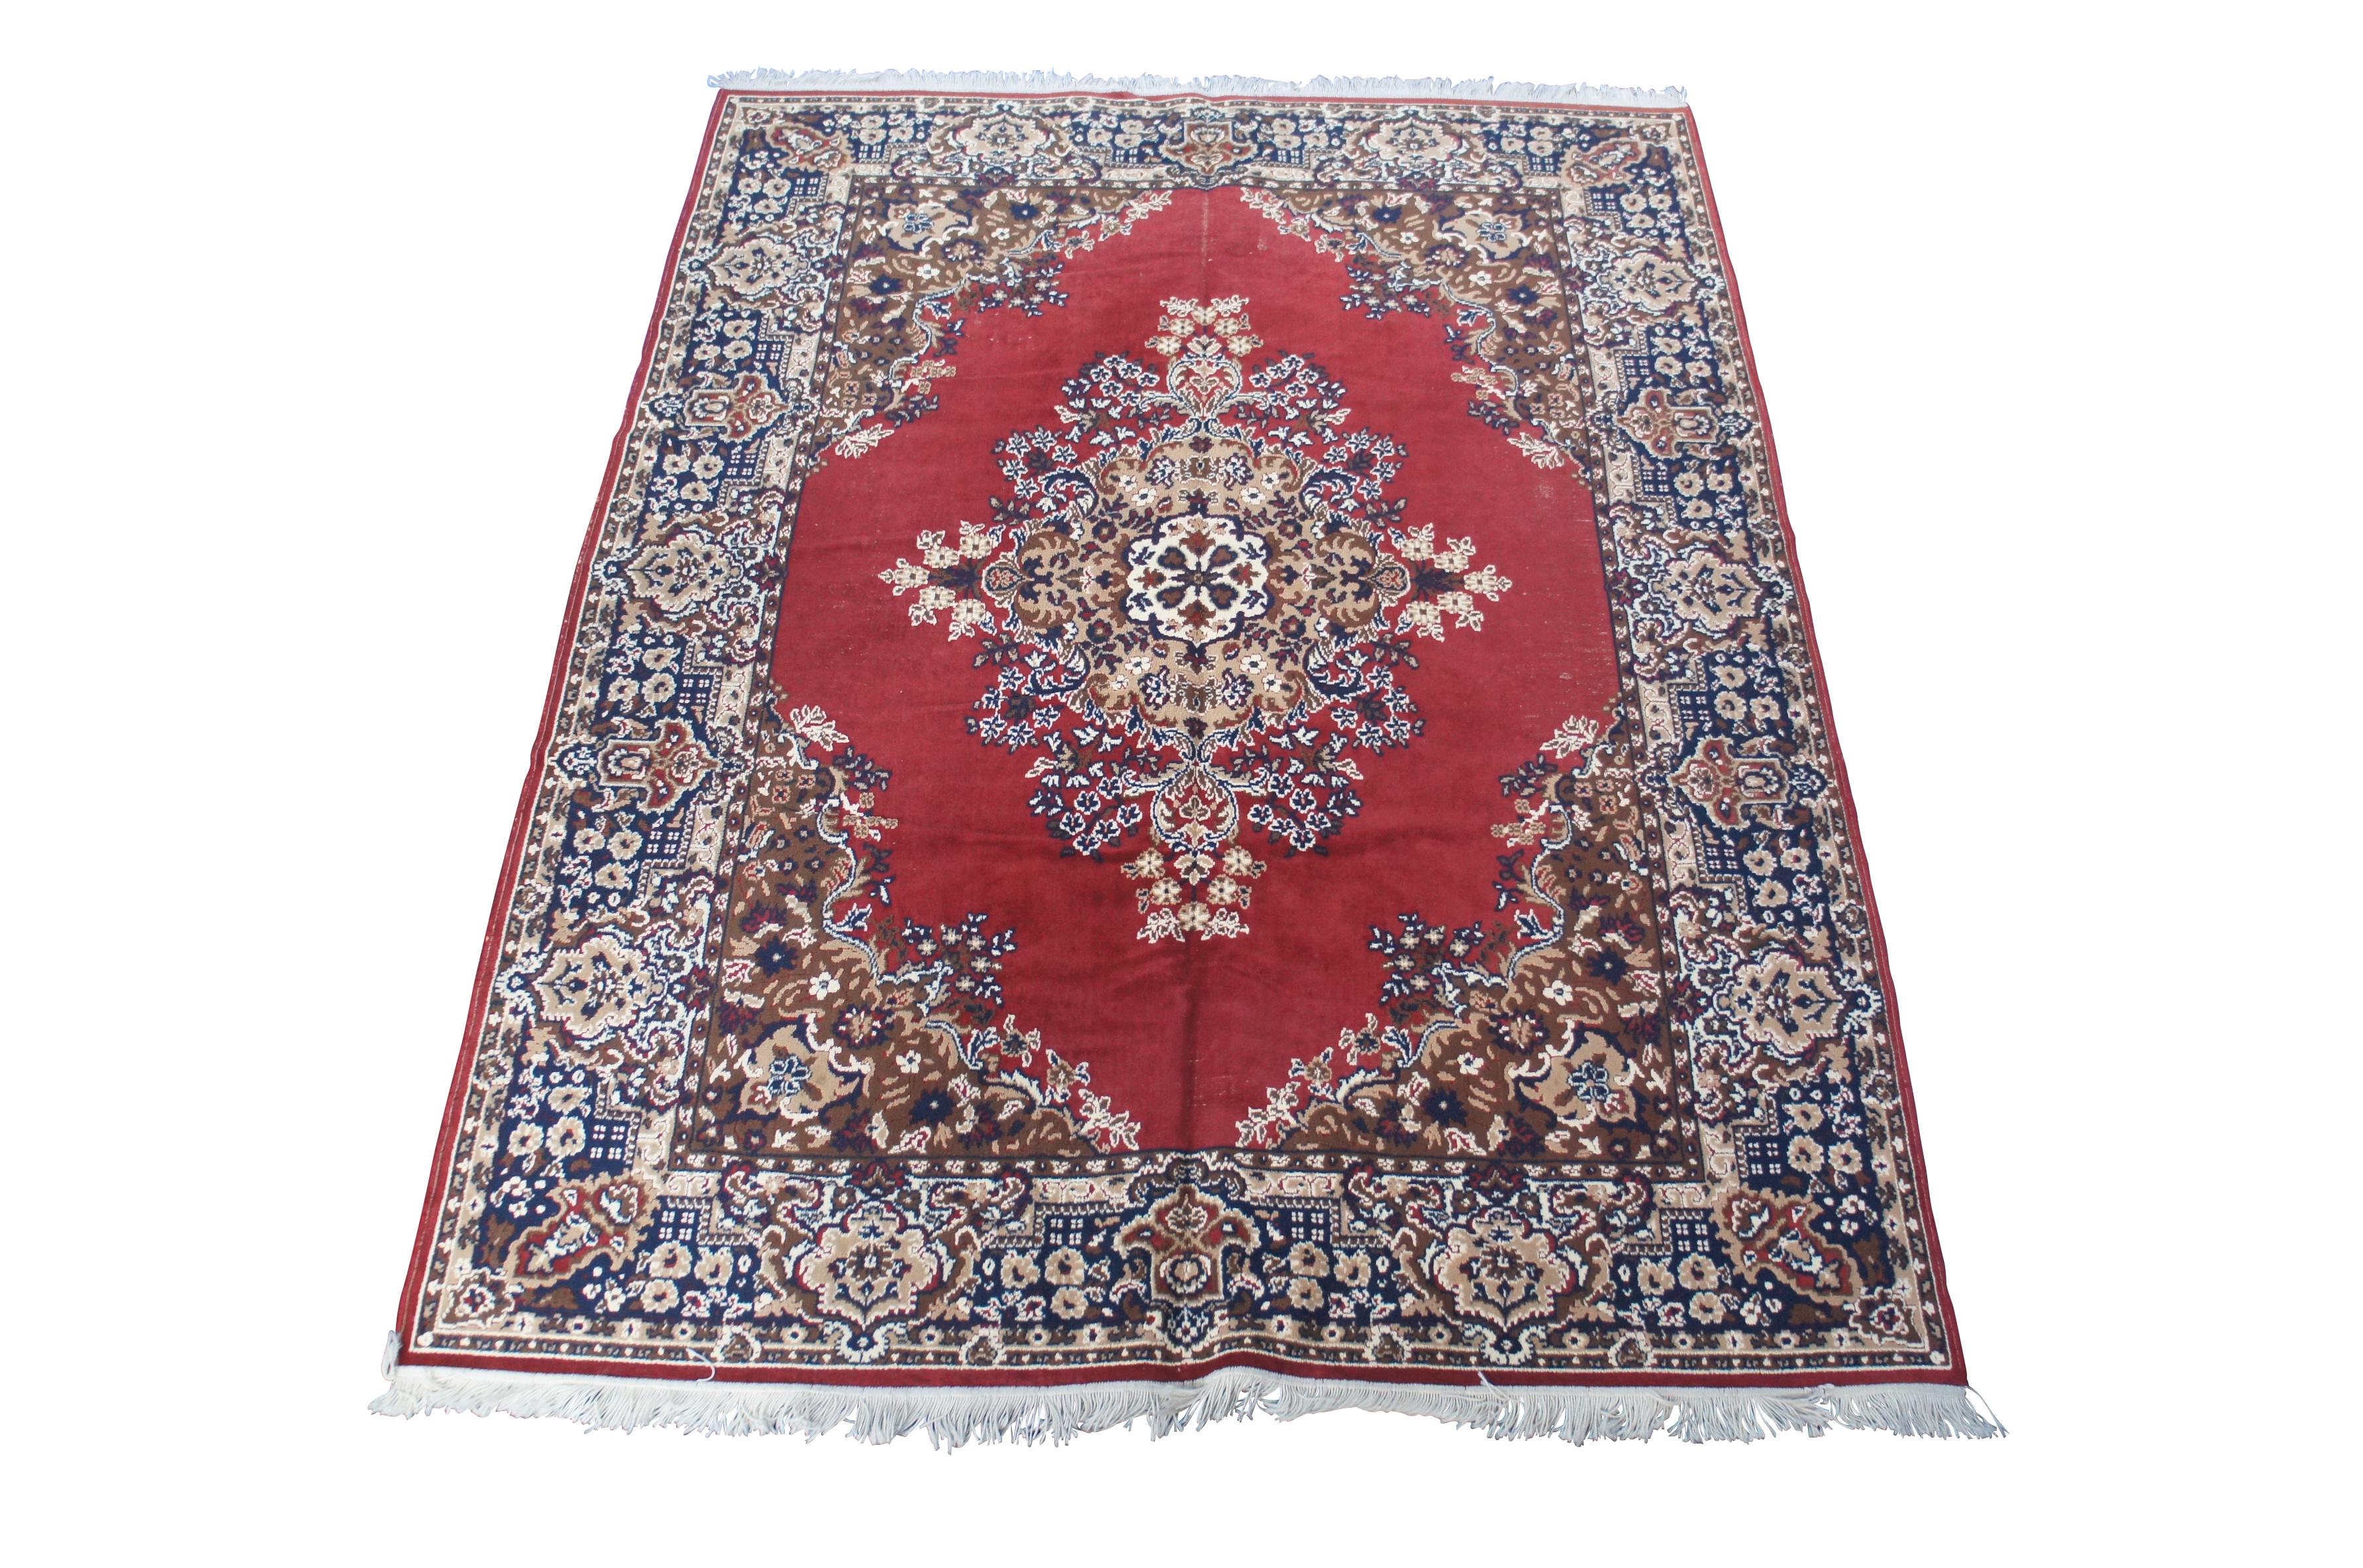 Vintage Beaulieu of American Wolefin V area rug or carpet.  Made of poly-yarn featuring a floral all over design with red field and central medallion.  Reds, Tans, Blues, Creme, Browns.

Dimensions:
128